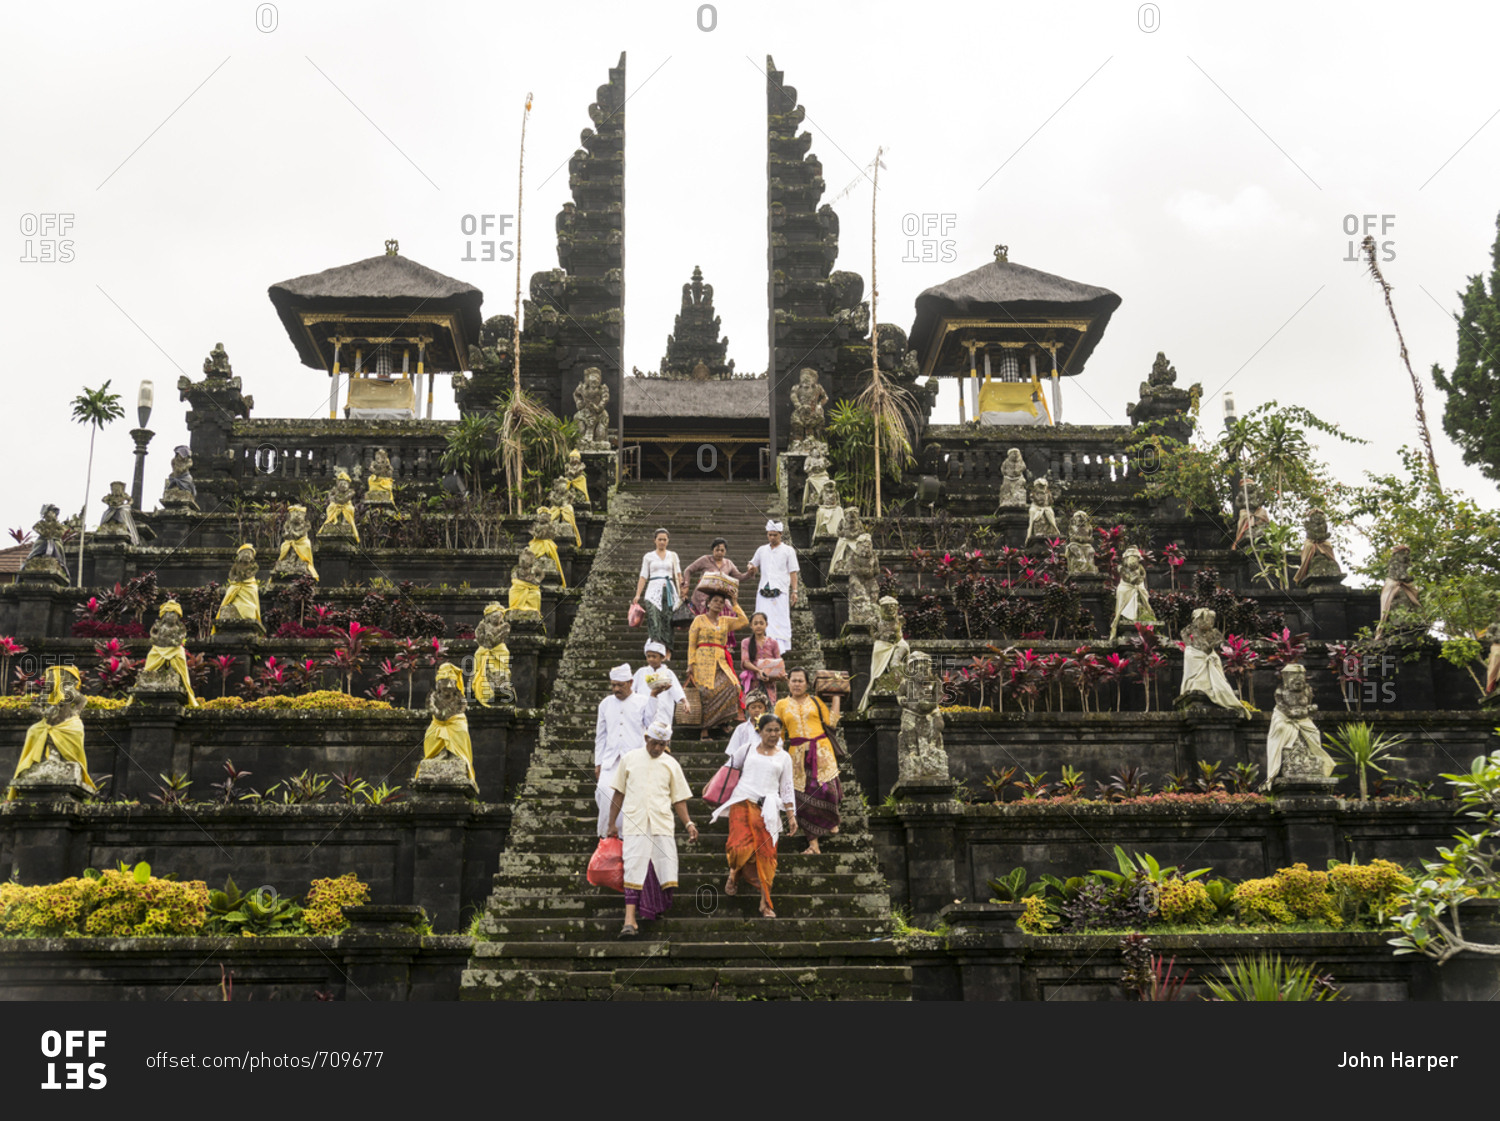 Worshippers descending the stairs of Besakih Temple in Bali, Indonesia